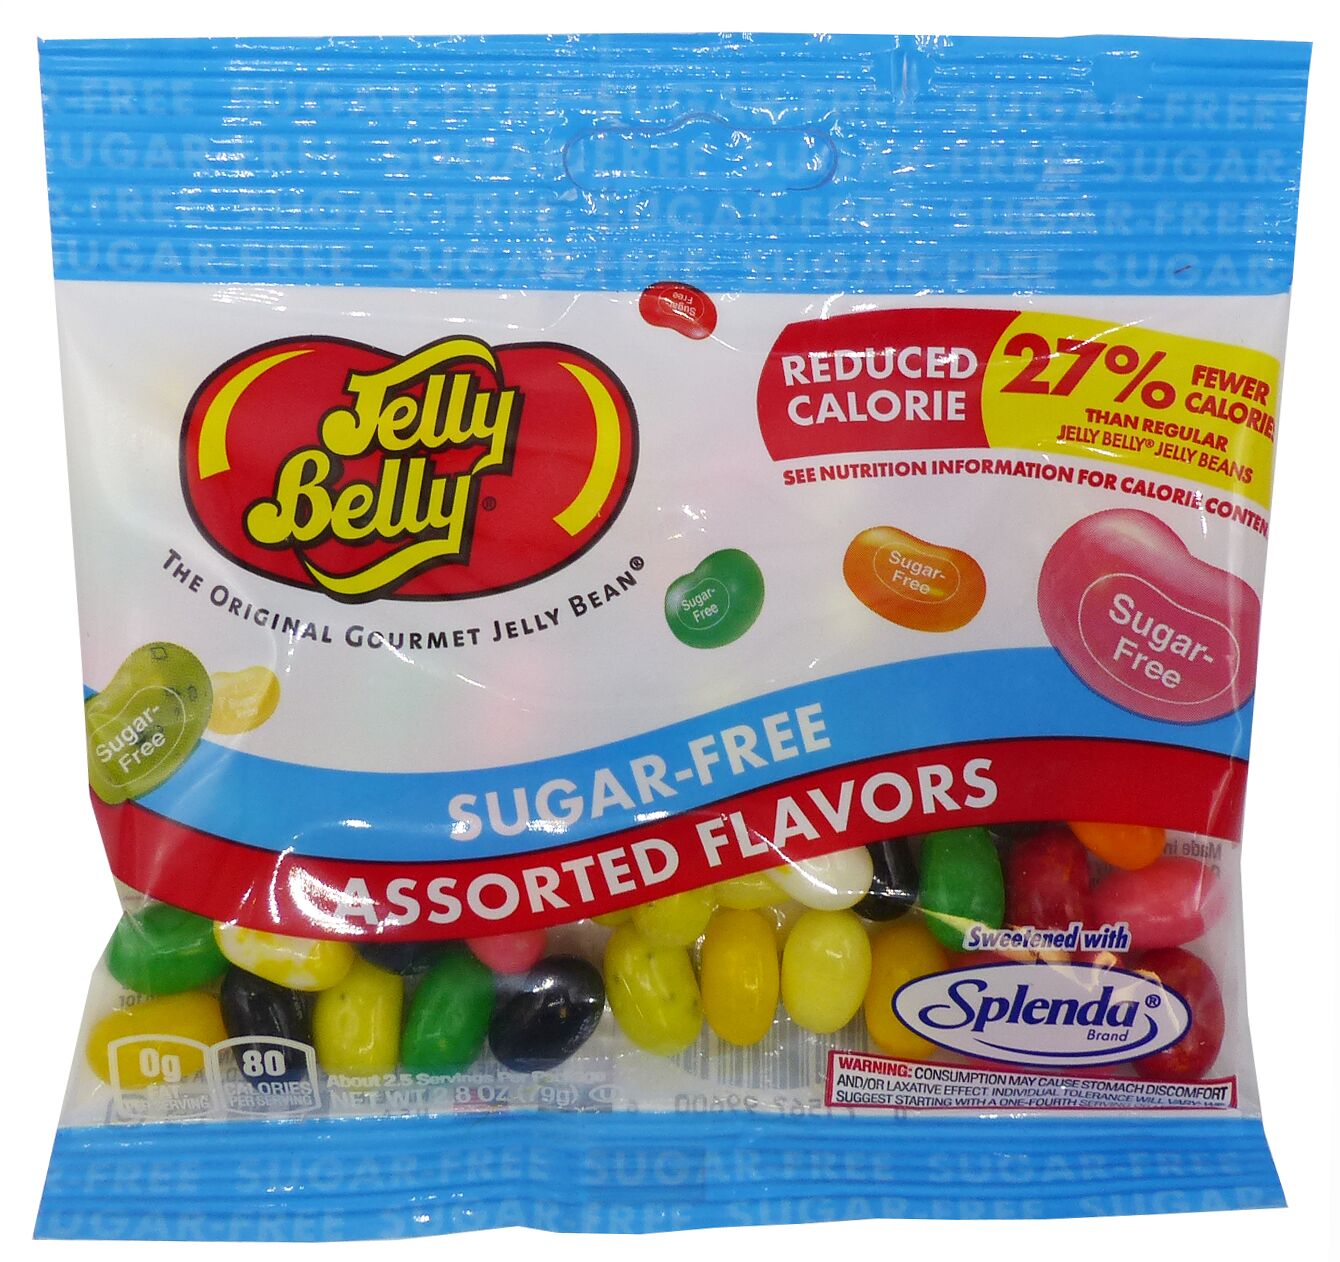 Jelly Belly Very Cherry Jelly Beans 3.5oz (99g) Manufacturer's Bag